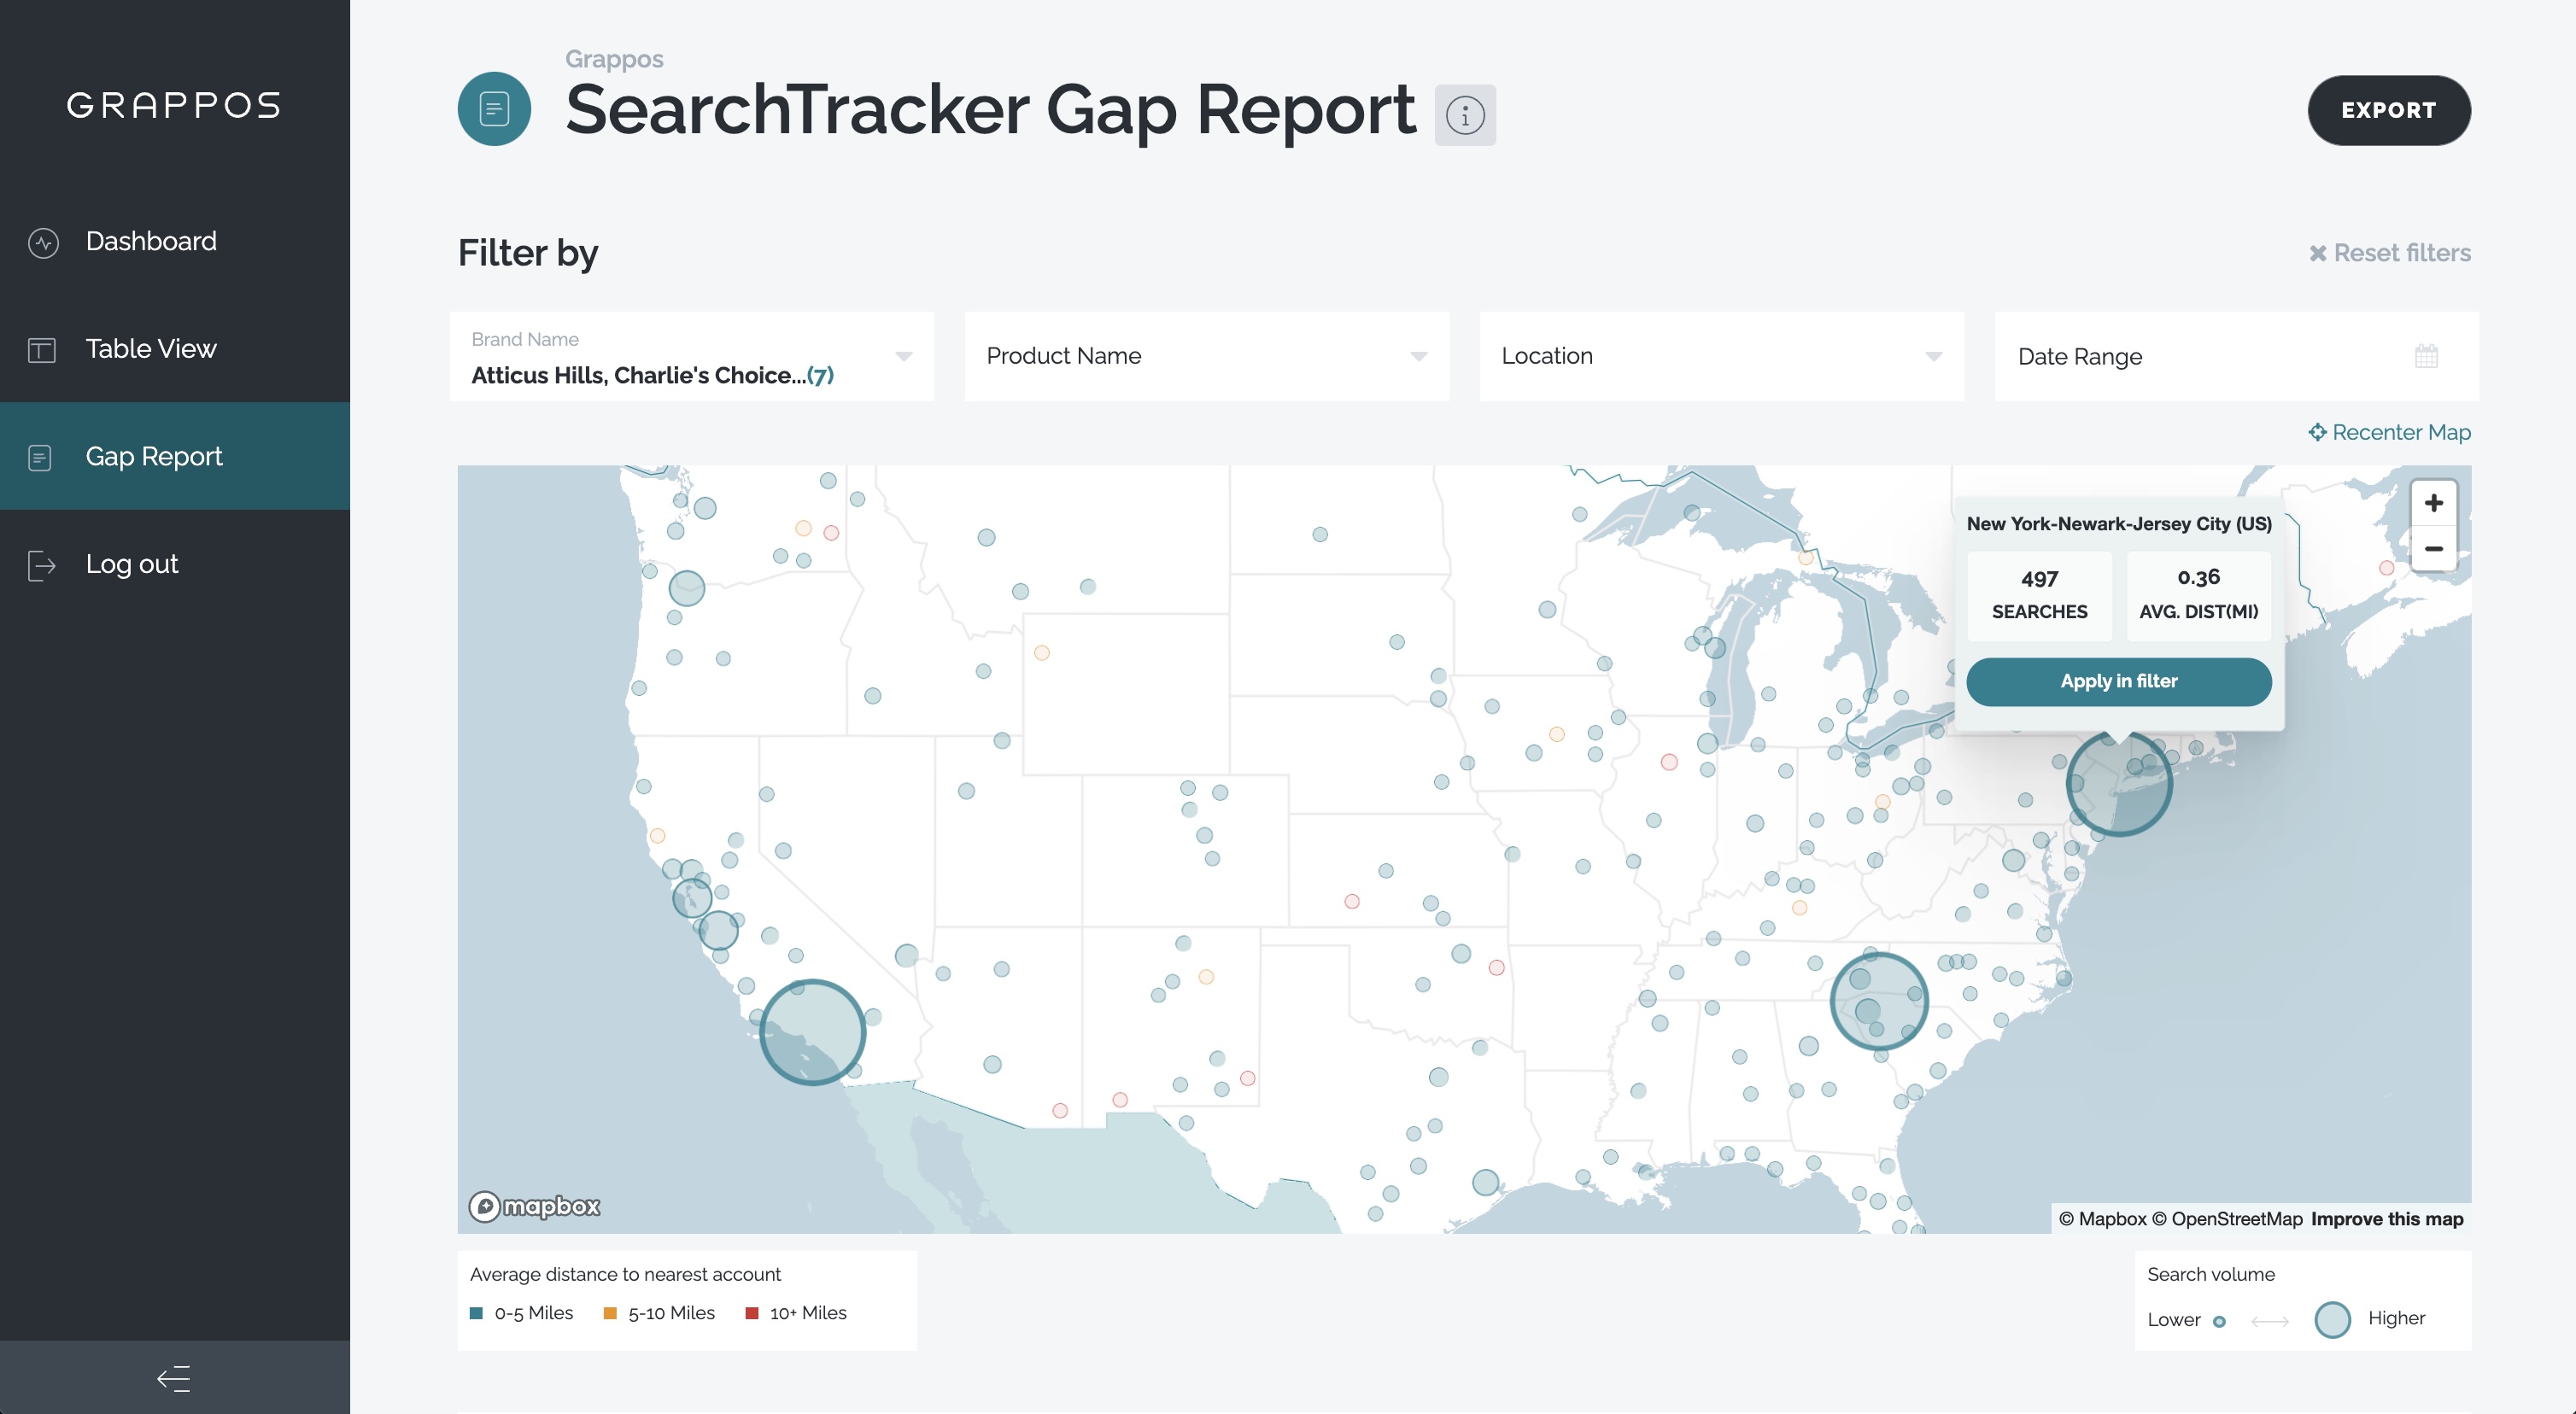 The Gap Report helps you discover markets with minimal retailer coverage but high search volume, a favorite feature of sales and marketing teams.